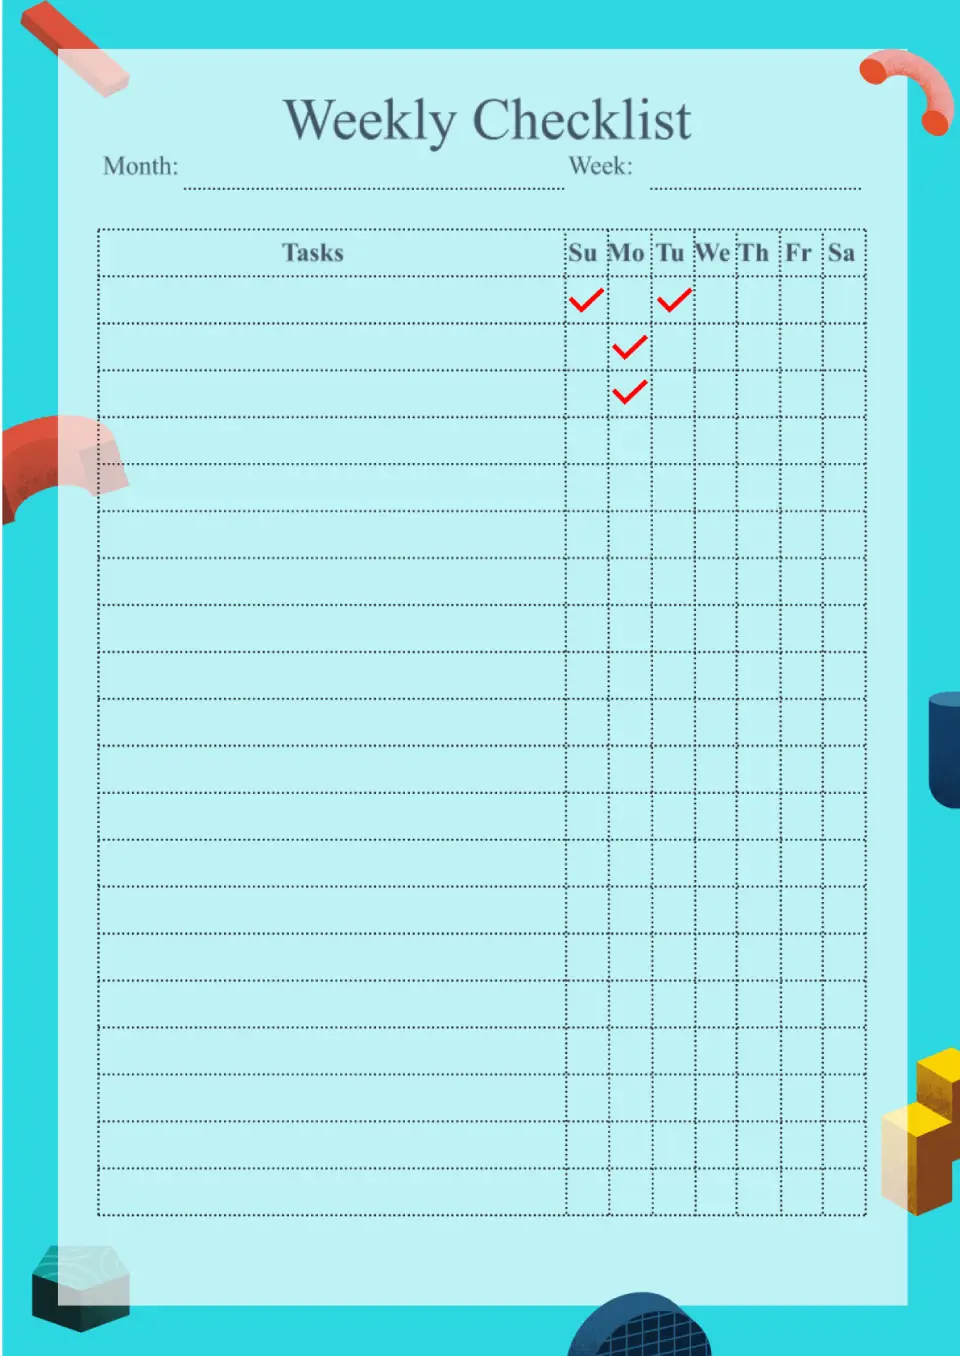 Weekly Checklist Template for Google Docs